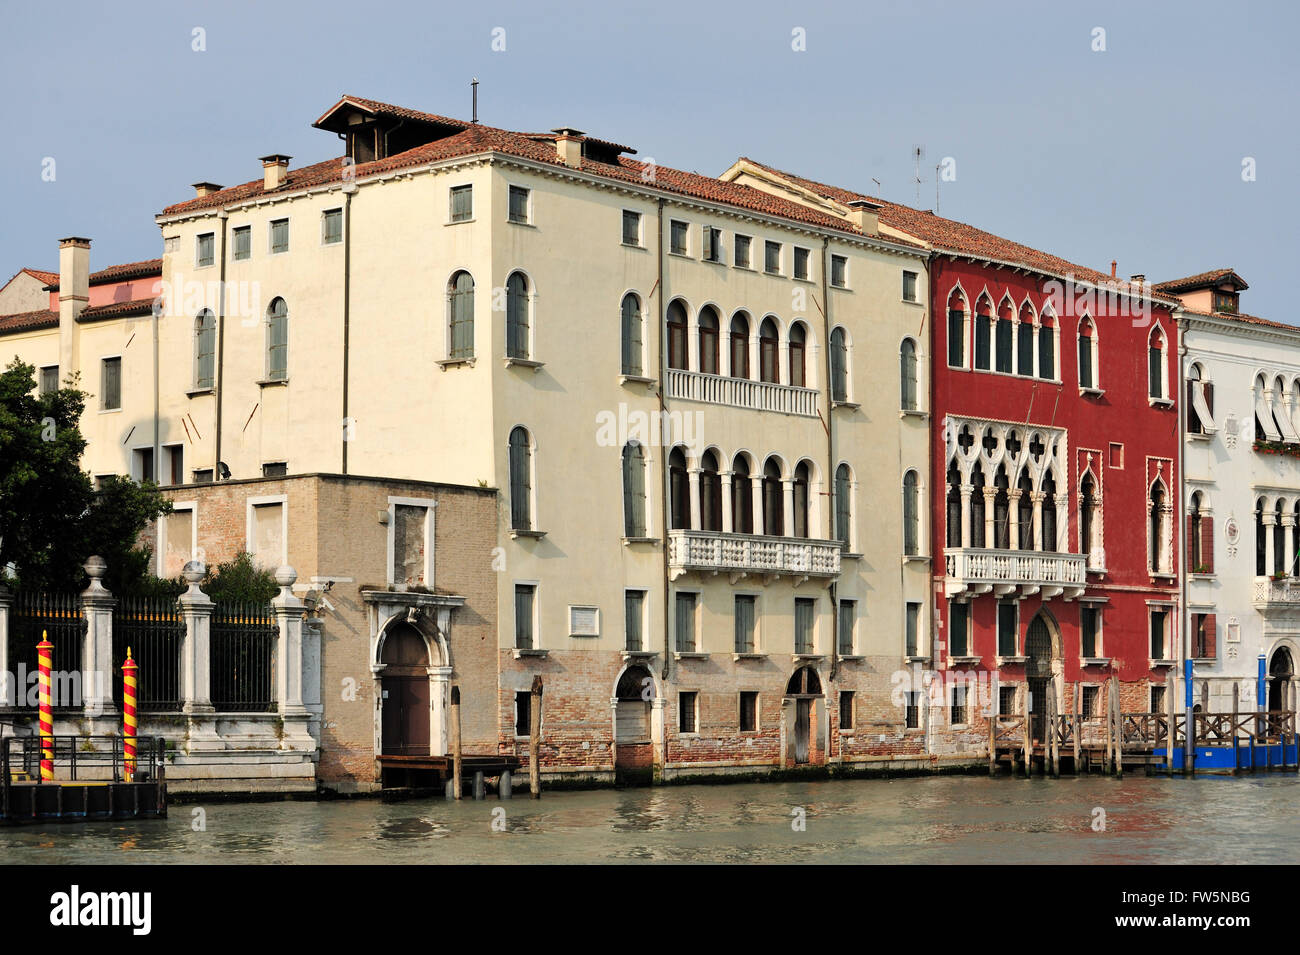 Palazzo Marcello, Venice. The birthplace and family home, on the Grand Canal in the Canareggio district, of Venetian composers Benedetto Marcello (1686-1739), composer of cantatas, oratorios and sinfonias; and of his brother Alessandro Marcello (1669-1747) nobleman, poet, philosopher, mathematician and composer of concertos. Stock Photo